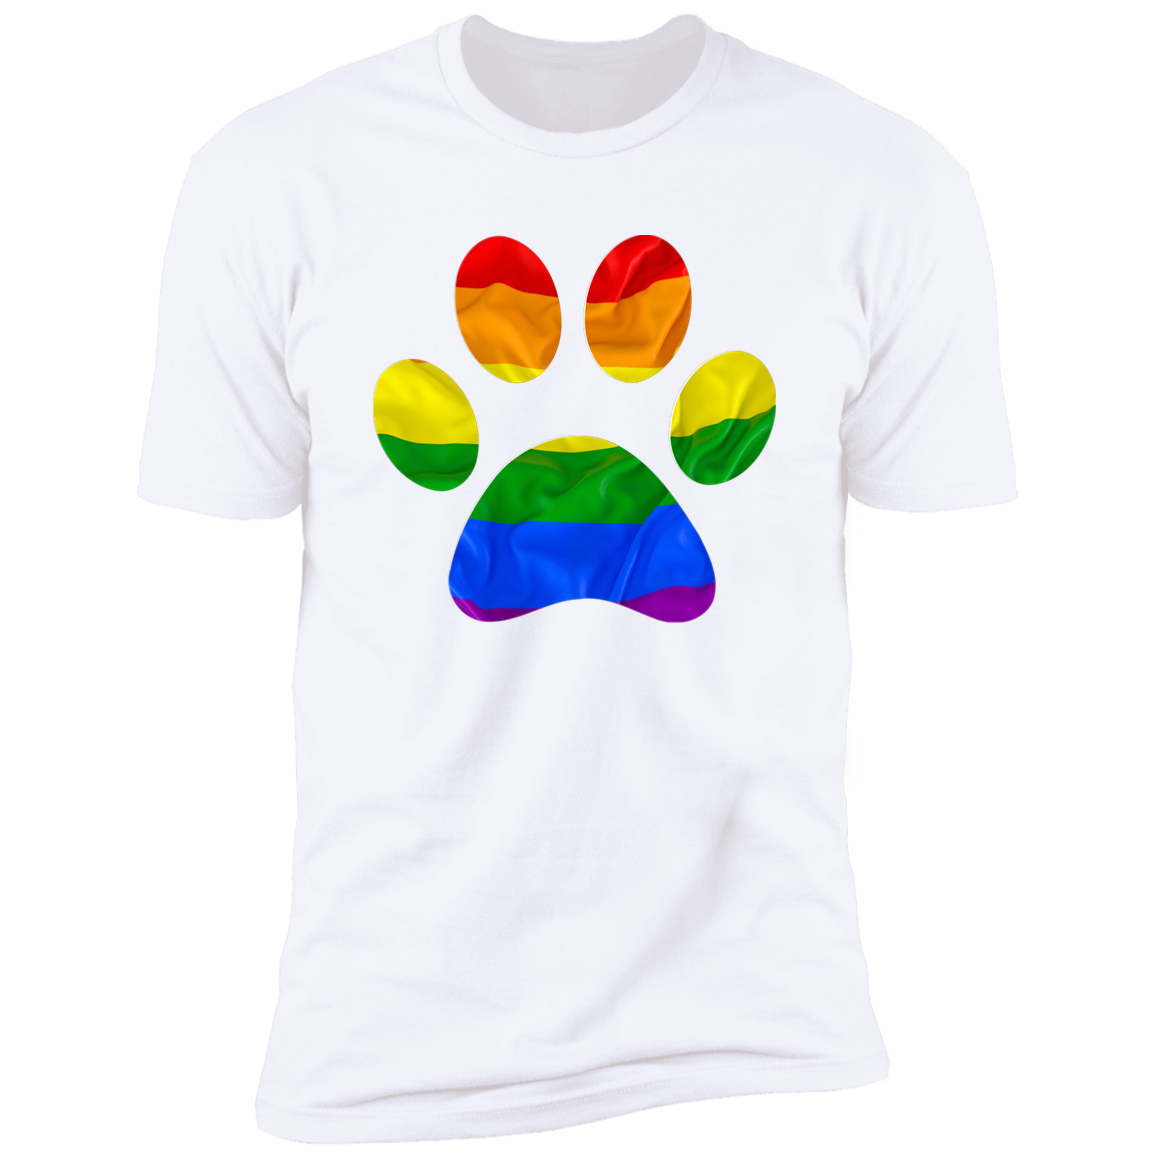 Pride Paw Pride T-shirt, Paw Pride Dog Shirt for humans, in white